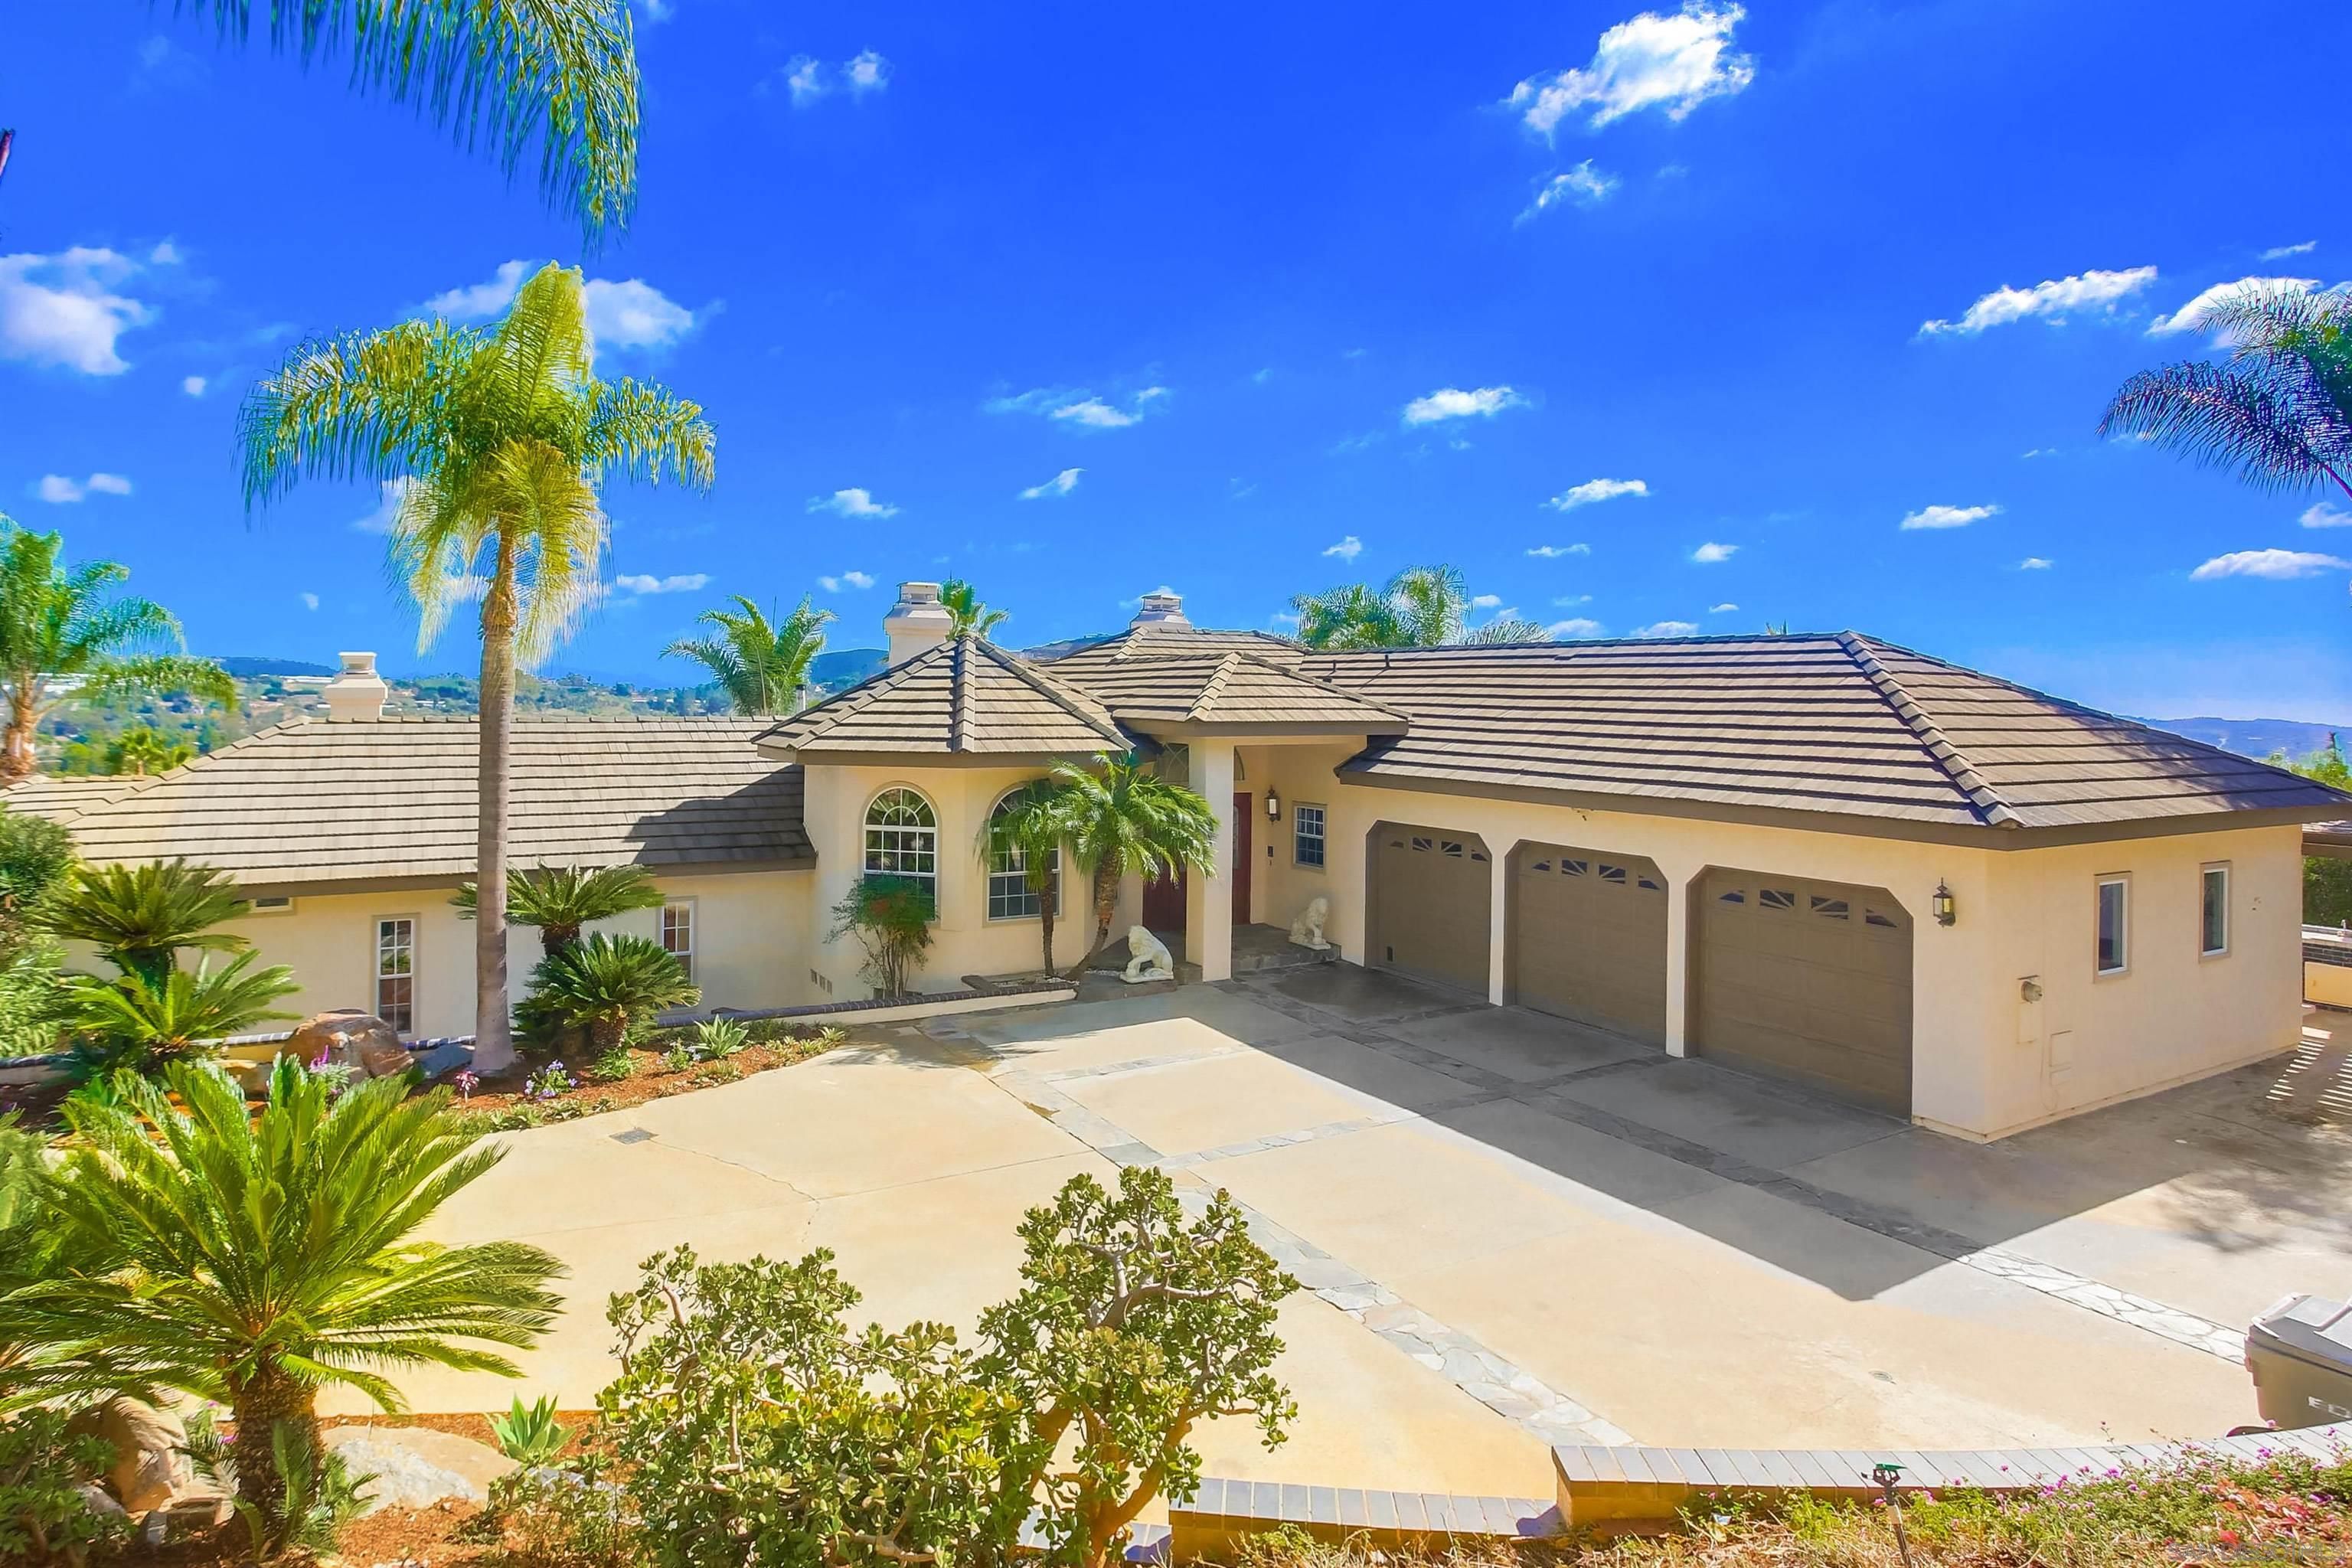 I have sold a property at 3059 Palm Hill Dr in Vista
